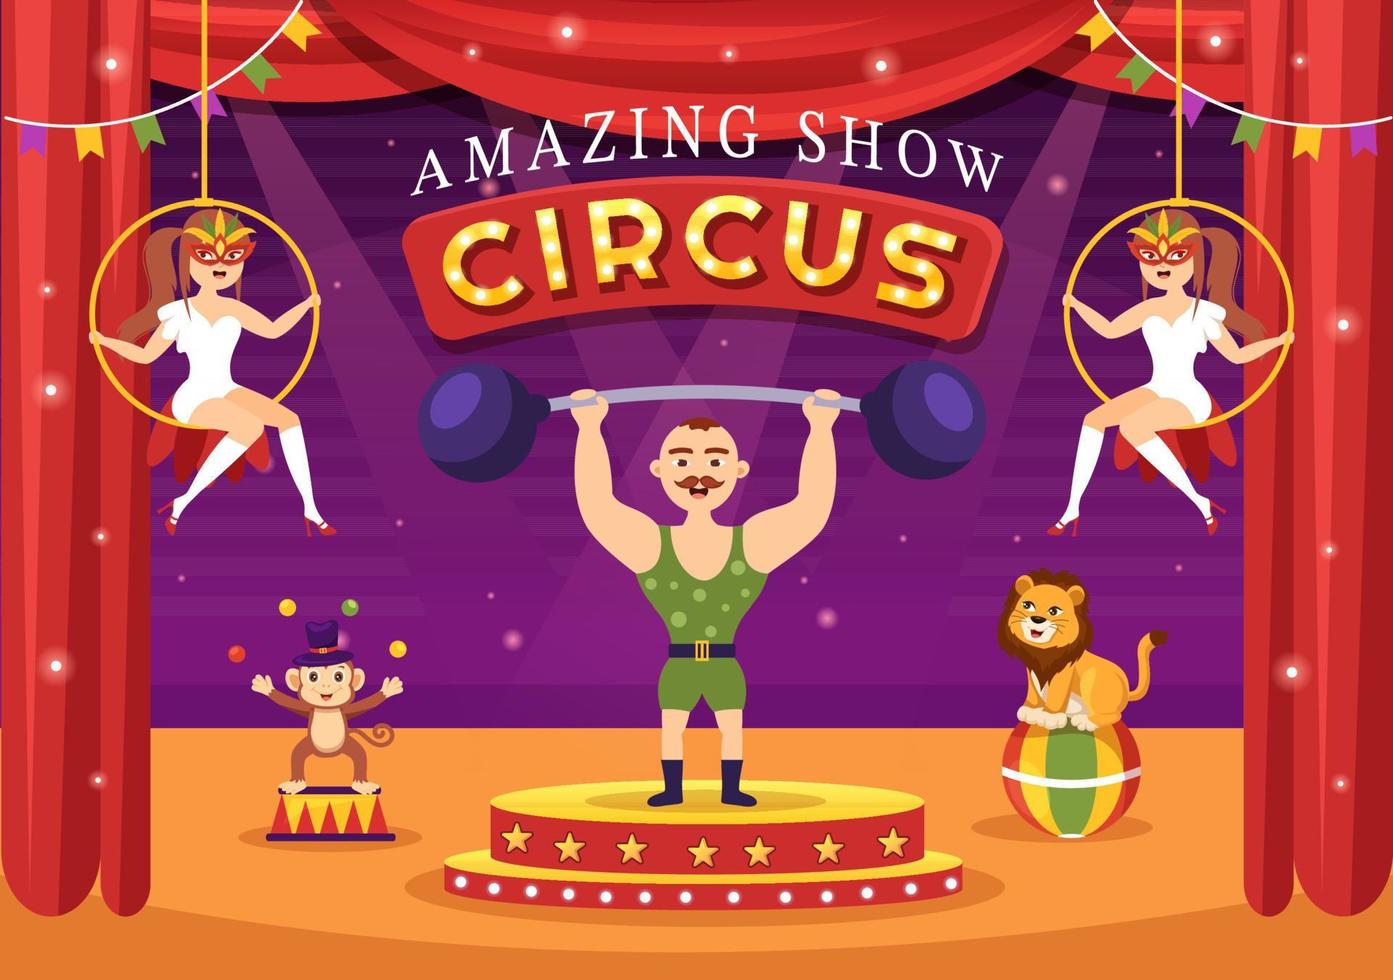 Circus Template Hand Drawn Cartoon Flat Illustration with Show of Gymnast, Magician, Animal Lion, Host, Entertainer, Clowns and Amusement Park vector